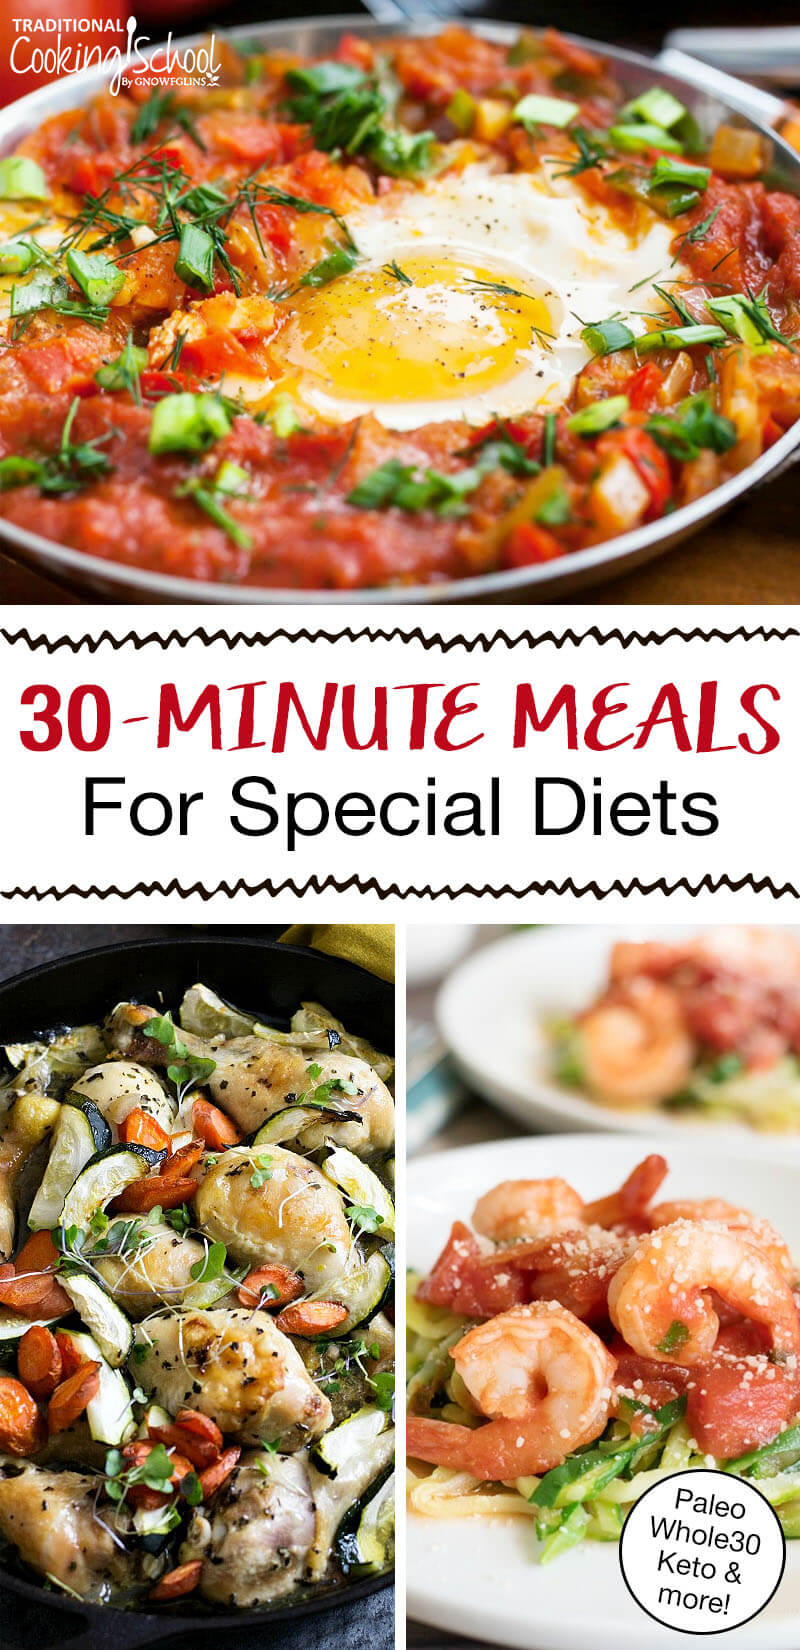 photo collage of quick and easy dinners, including shakshuka and a shrimp dish, with text overlay: "30-Minute Meals For Special Diets (Paleo, Whole30, Keto & more!)"